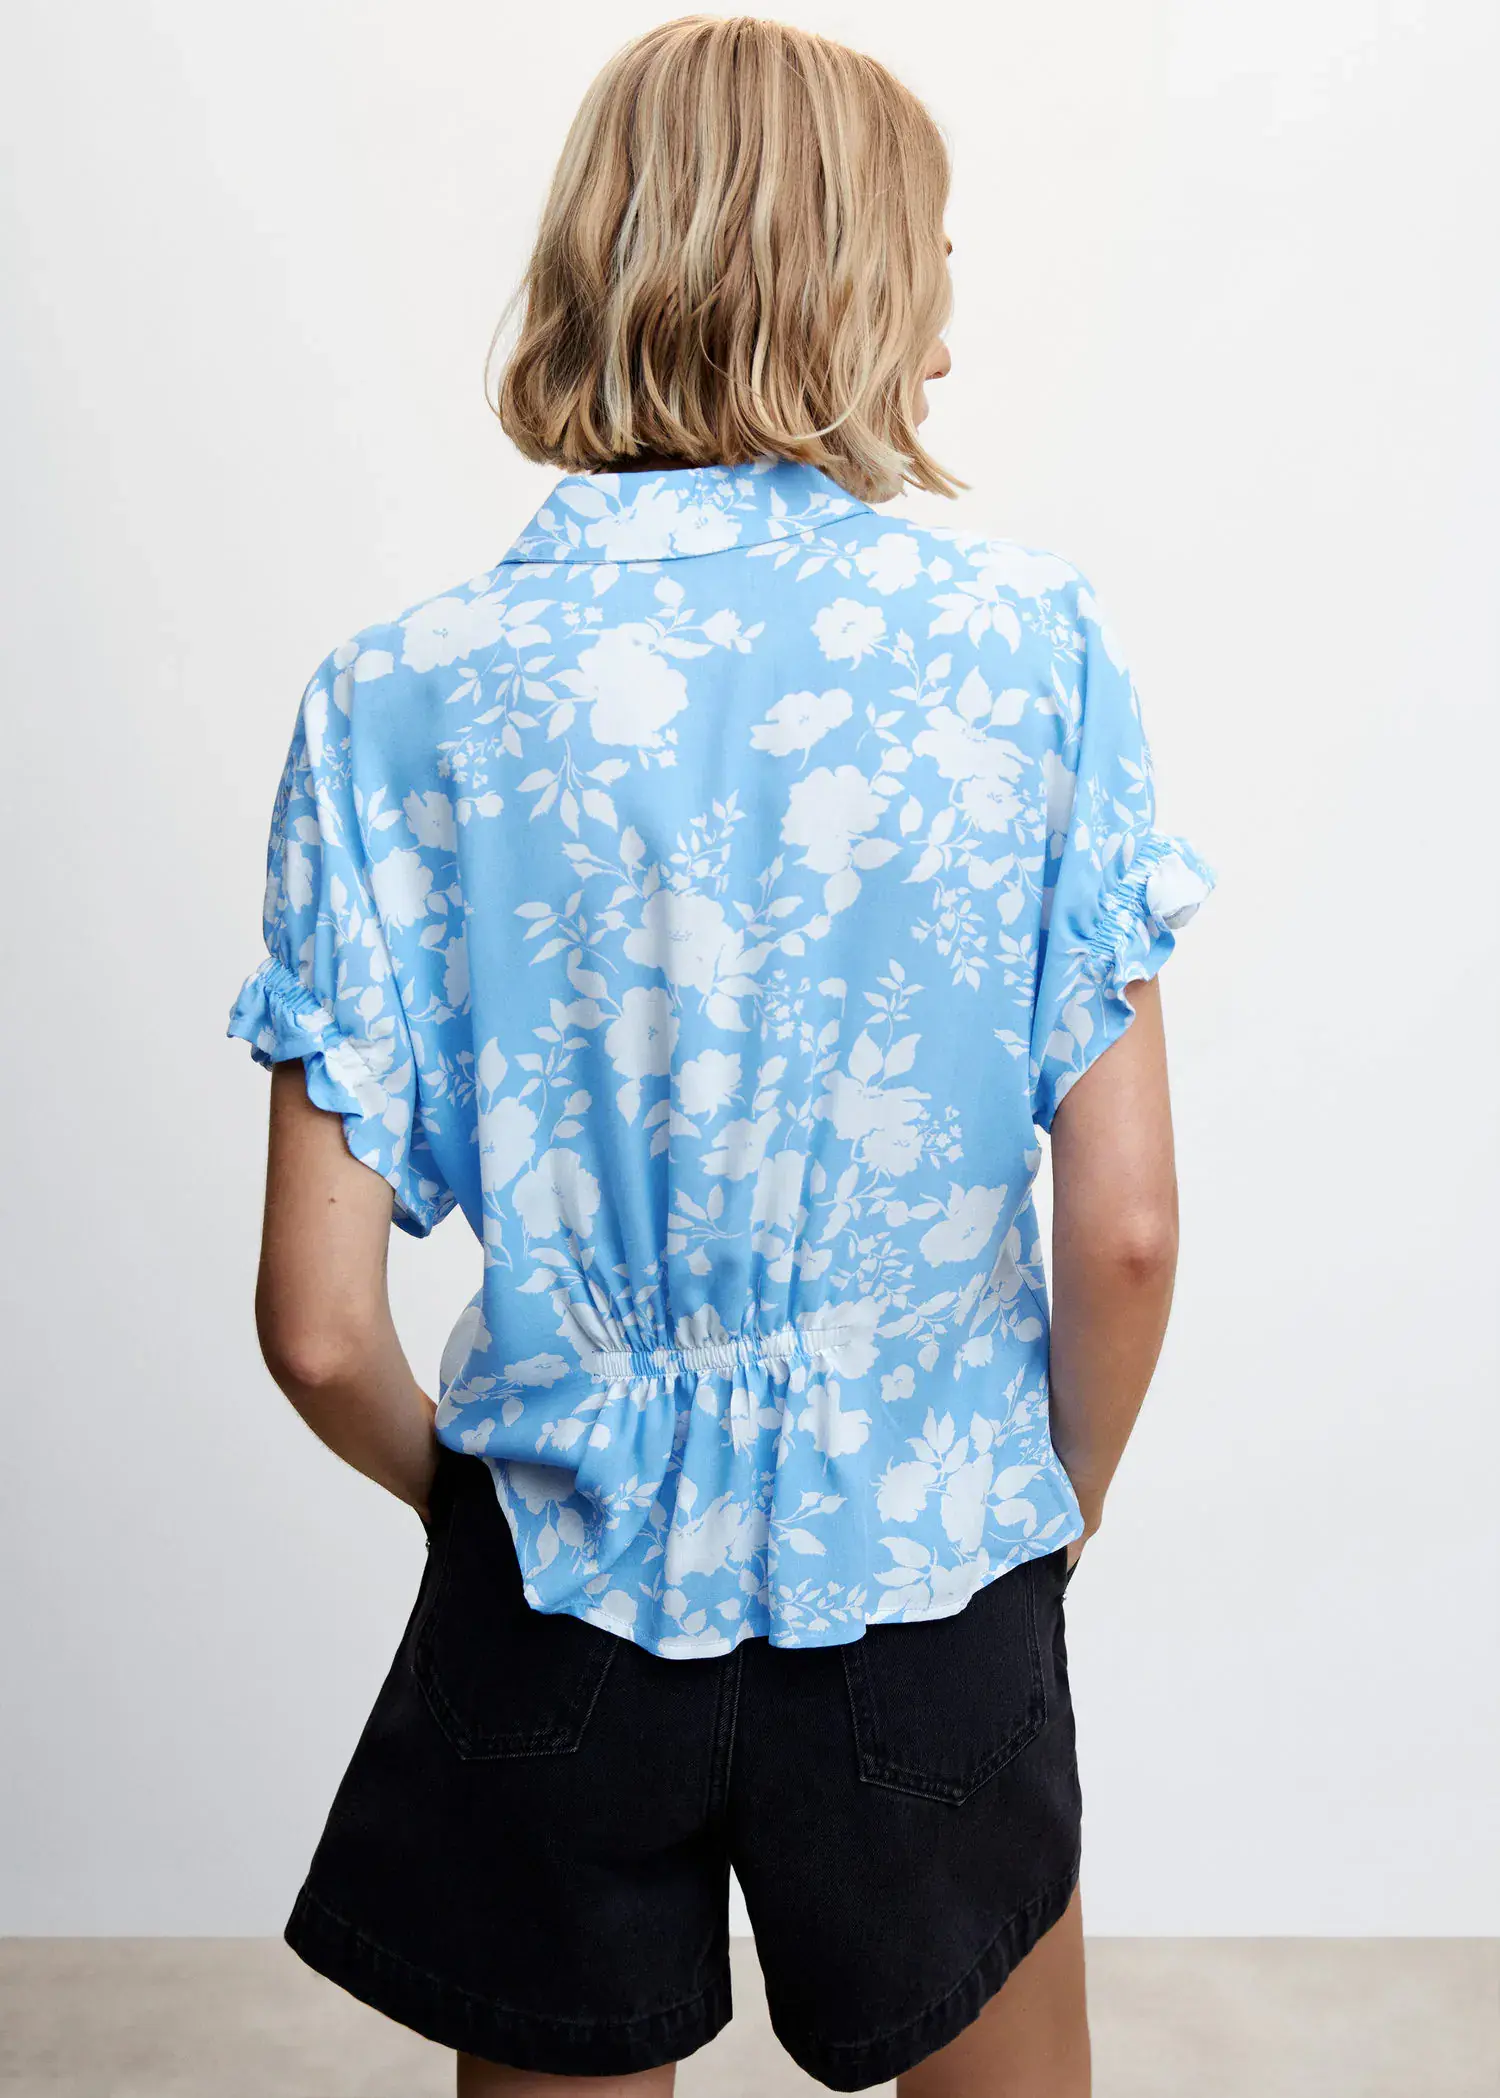 Mango Flowers printed shirt. a woman wearing a blue and white floral shirt. 